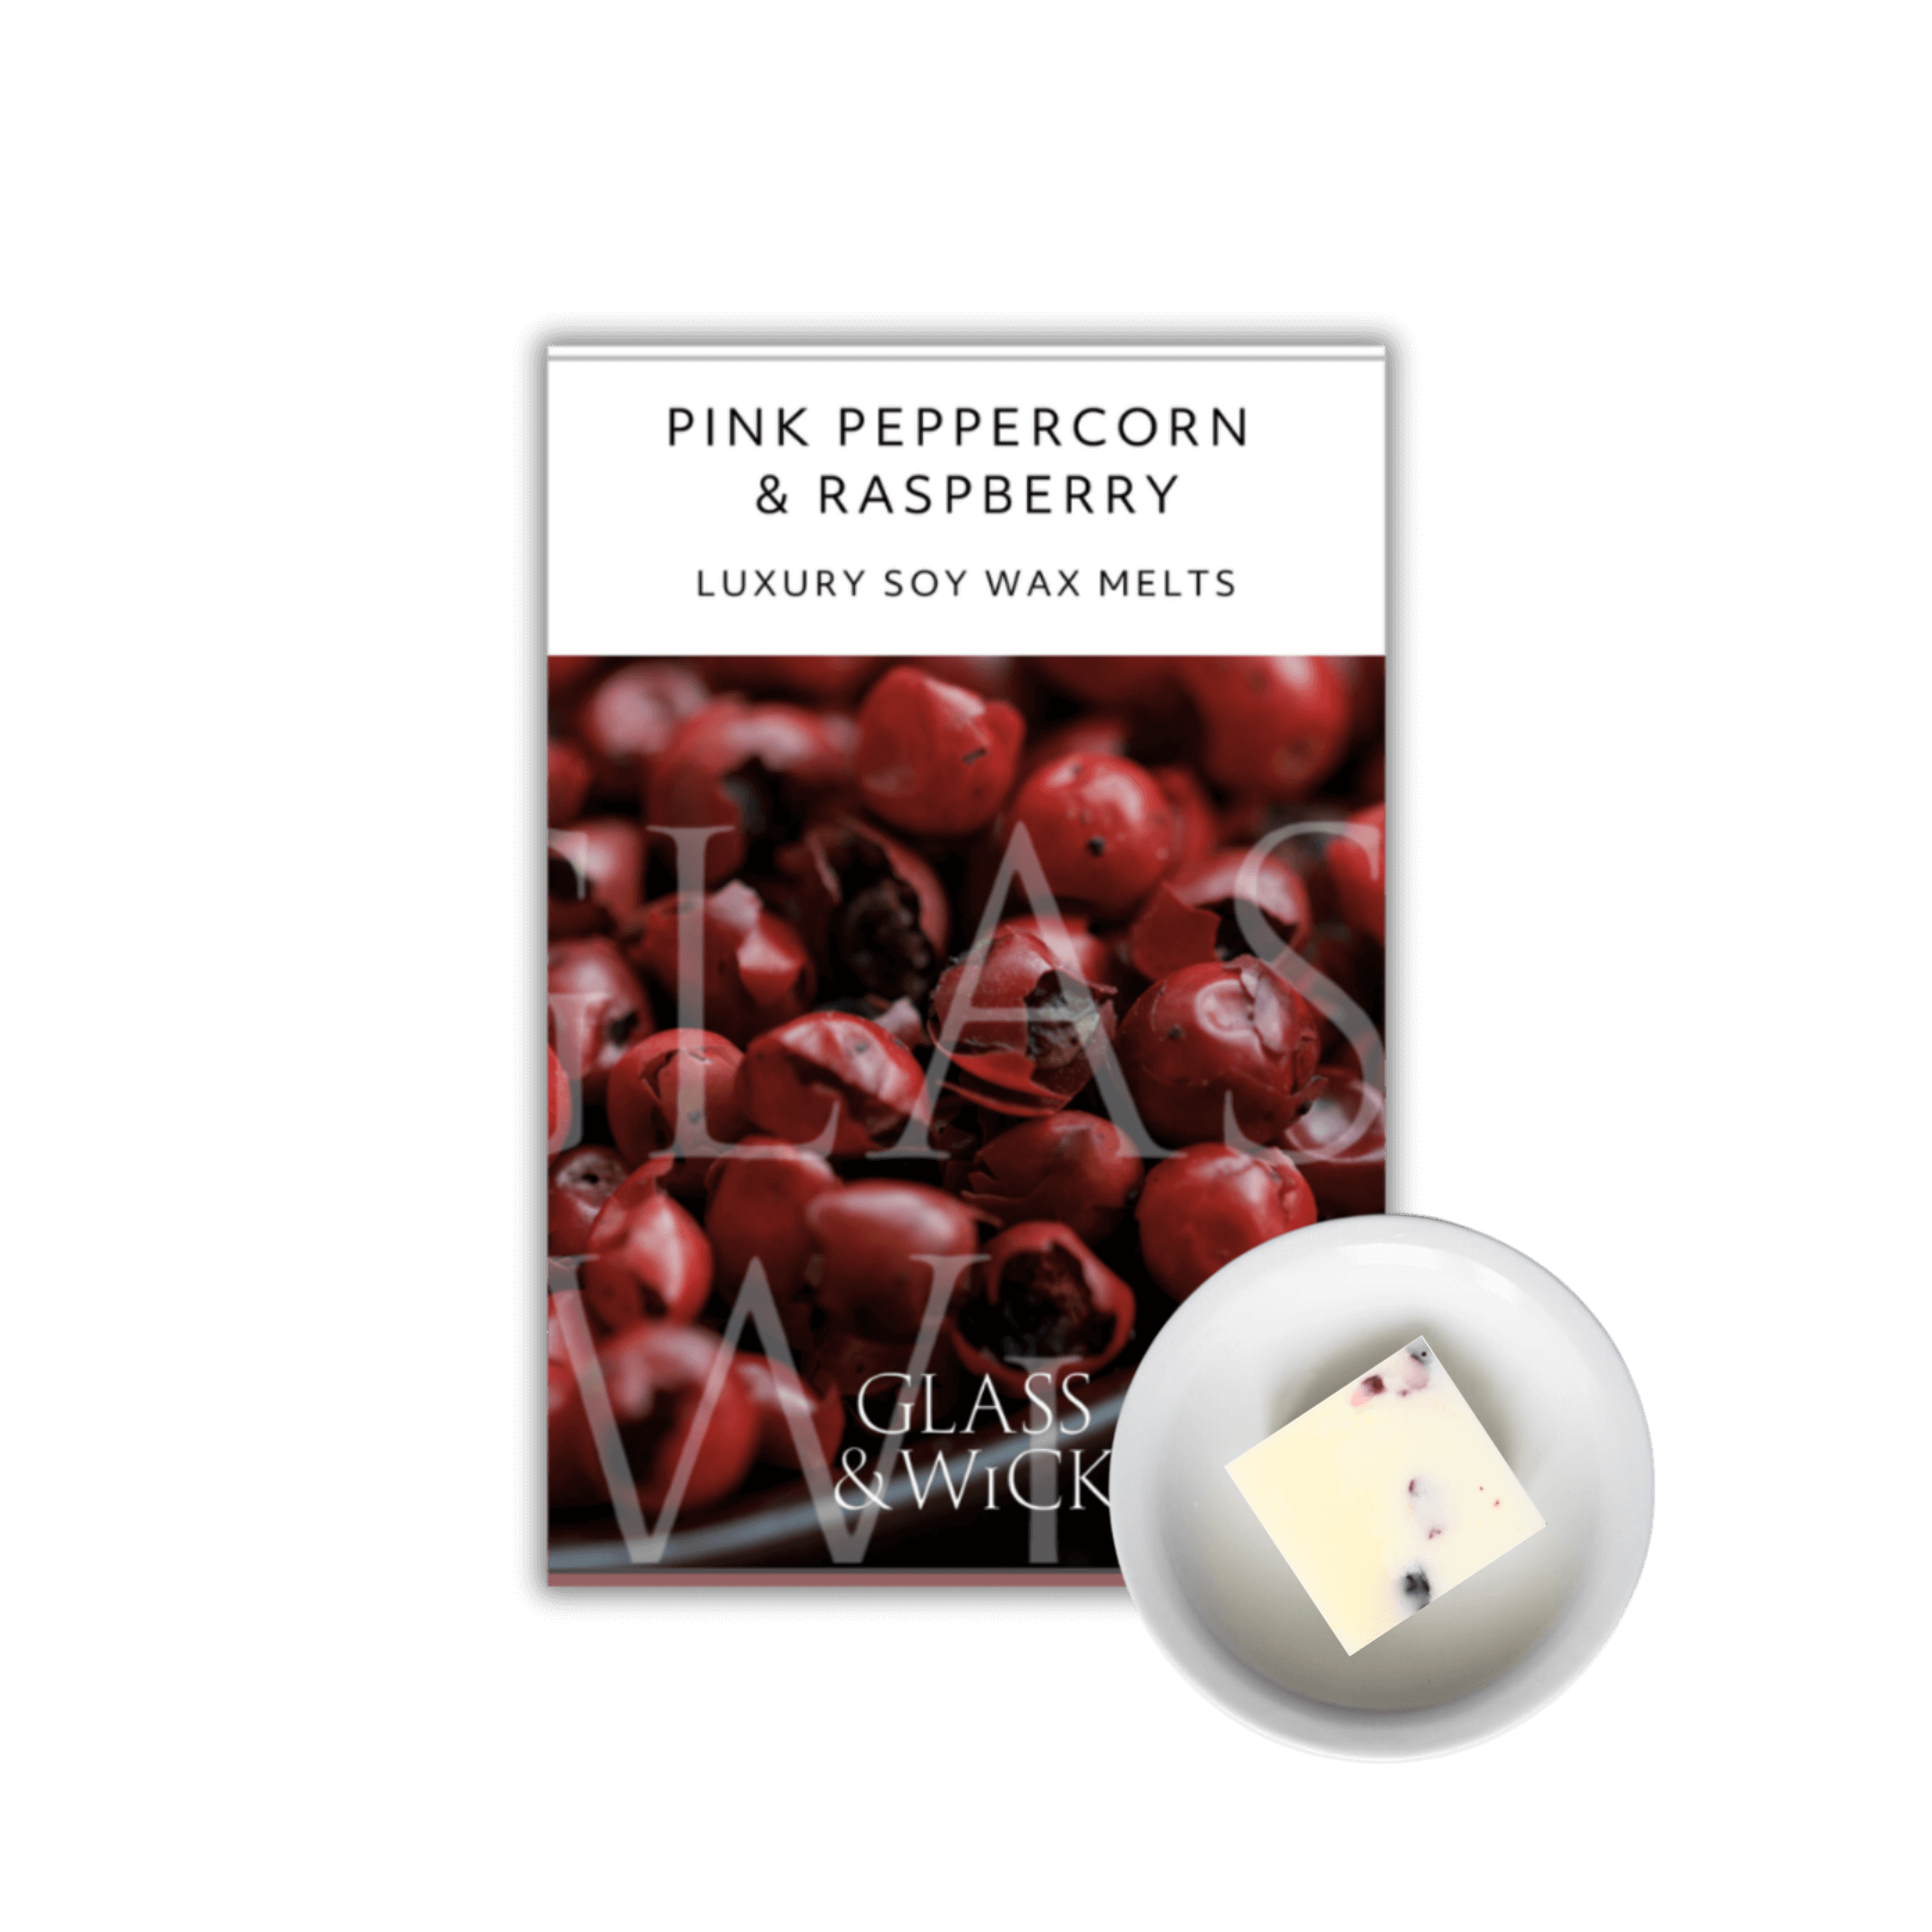 raspberry scented soy wax melts